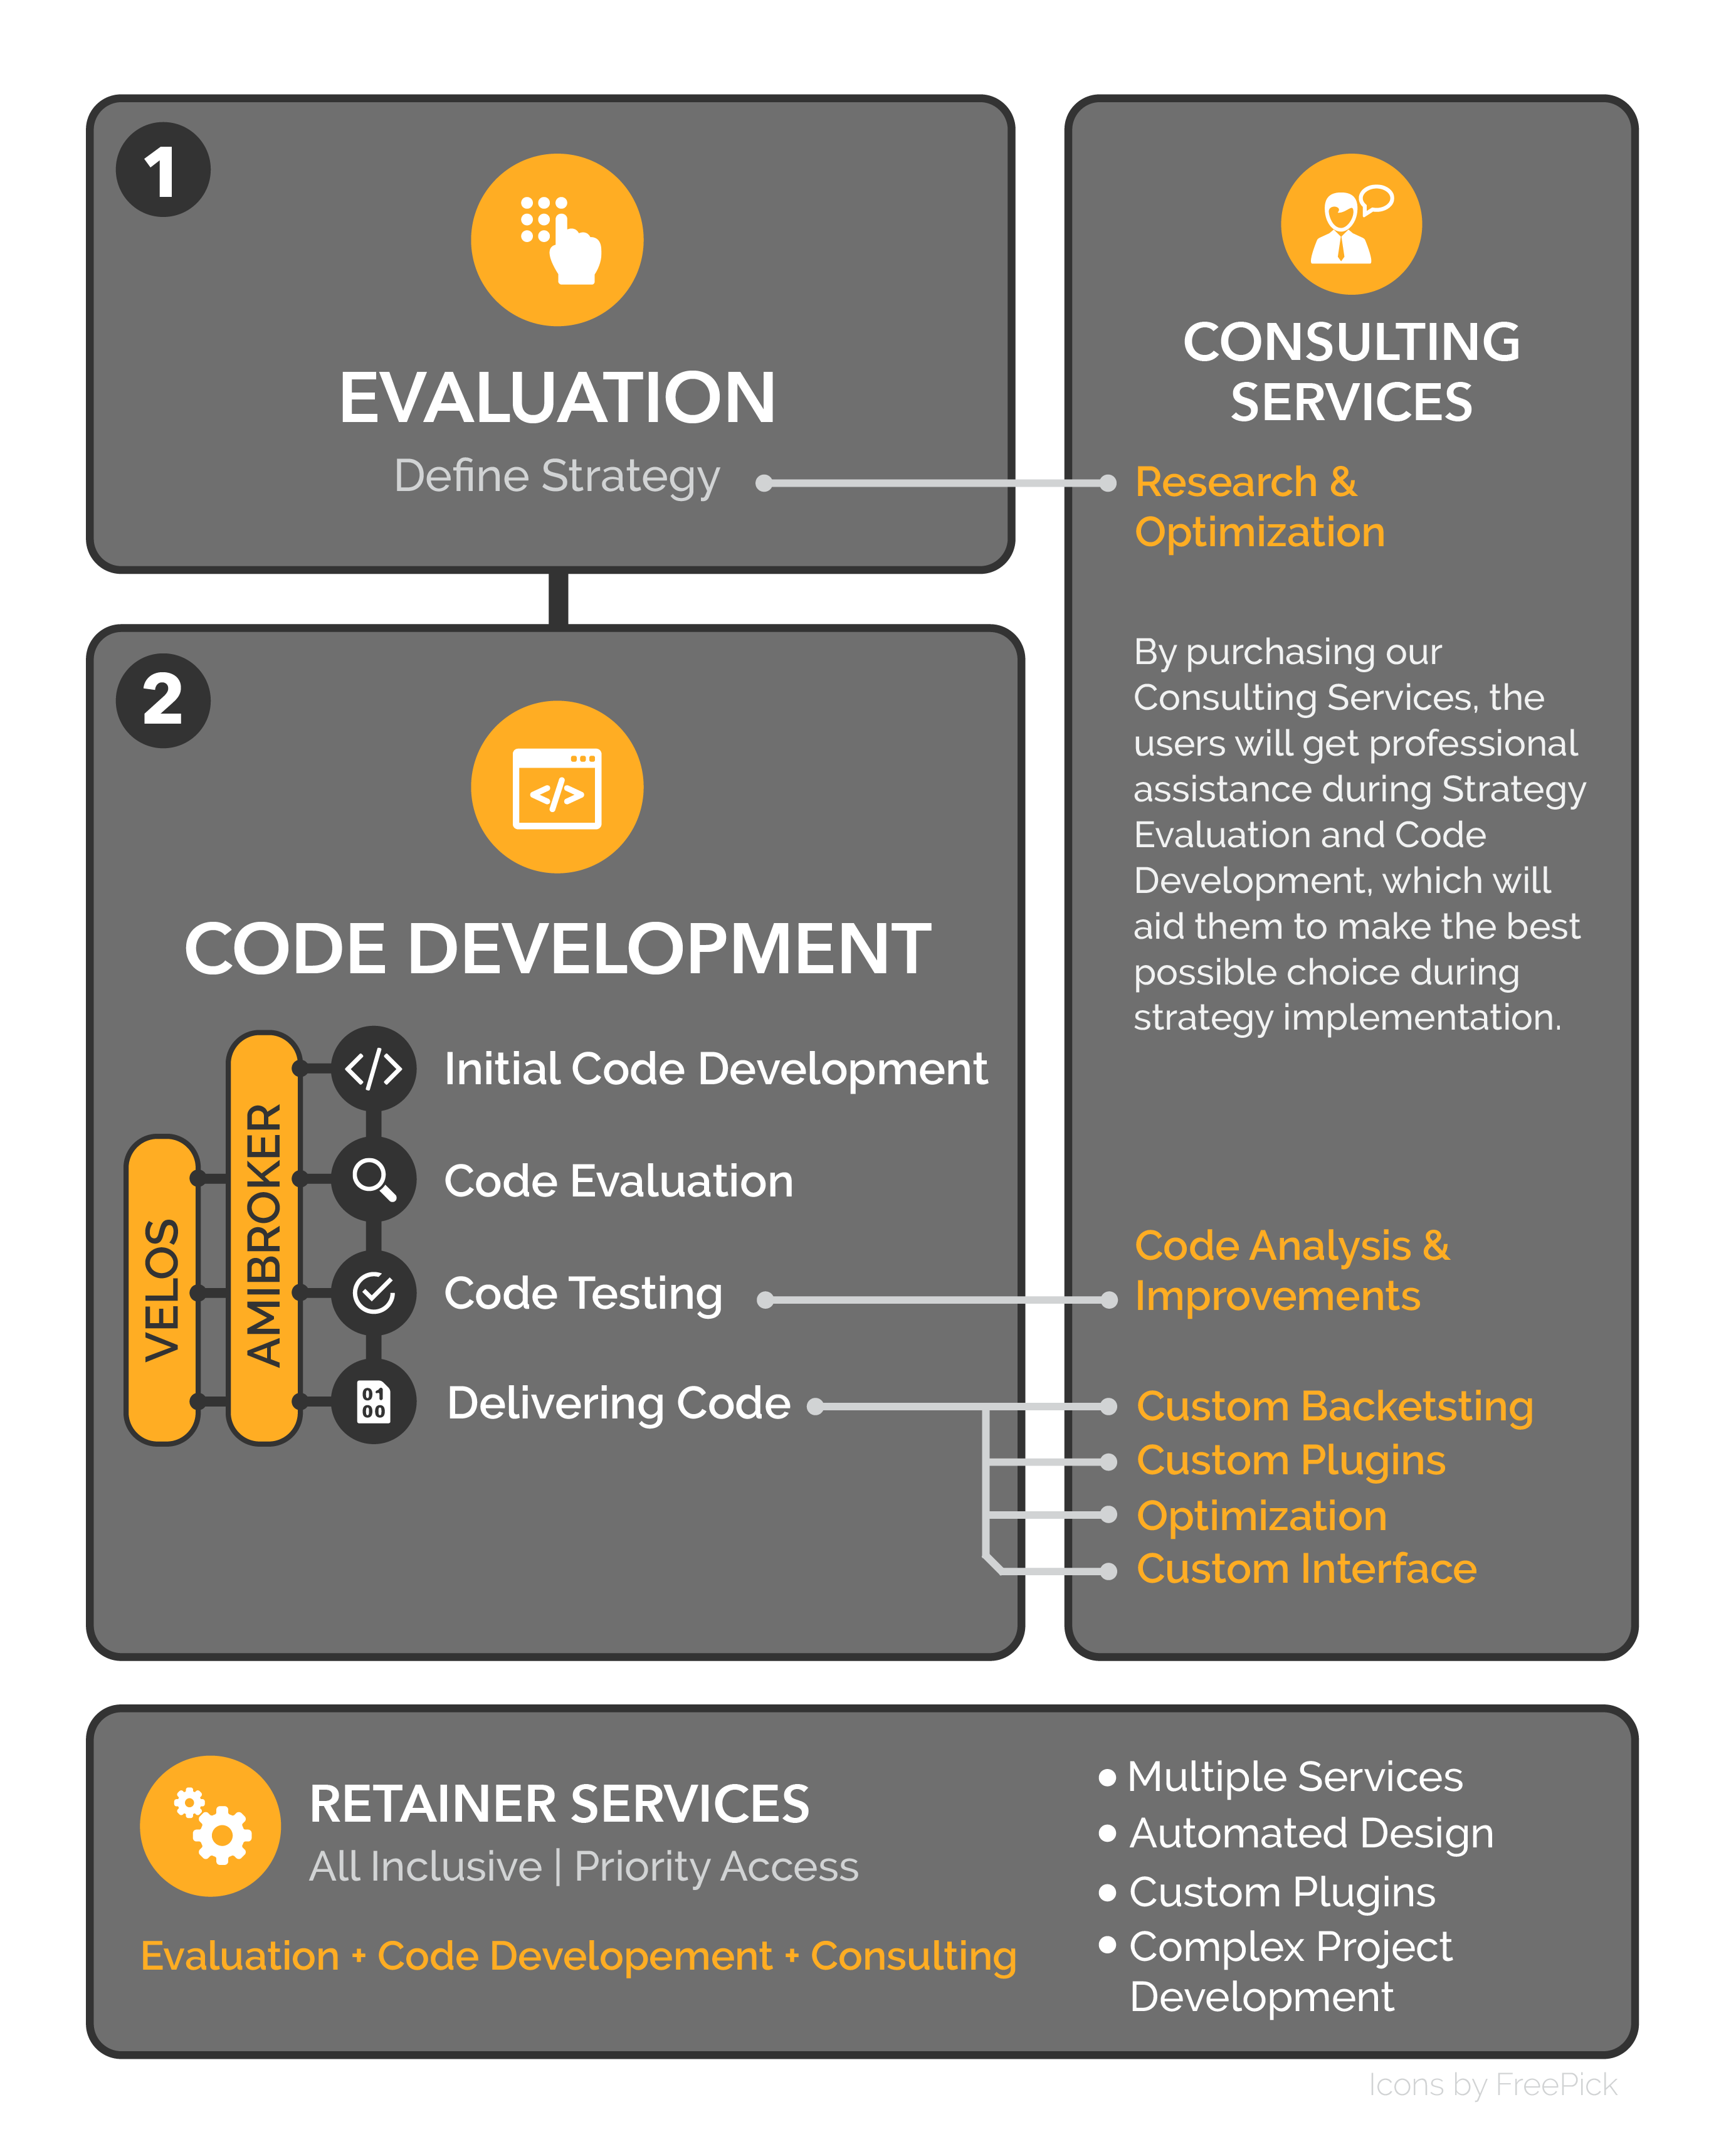 evaluation, code development, consulting services, retainer services